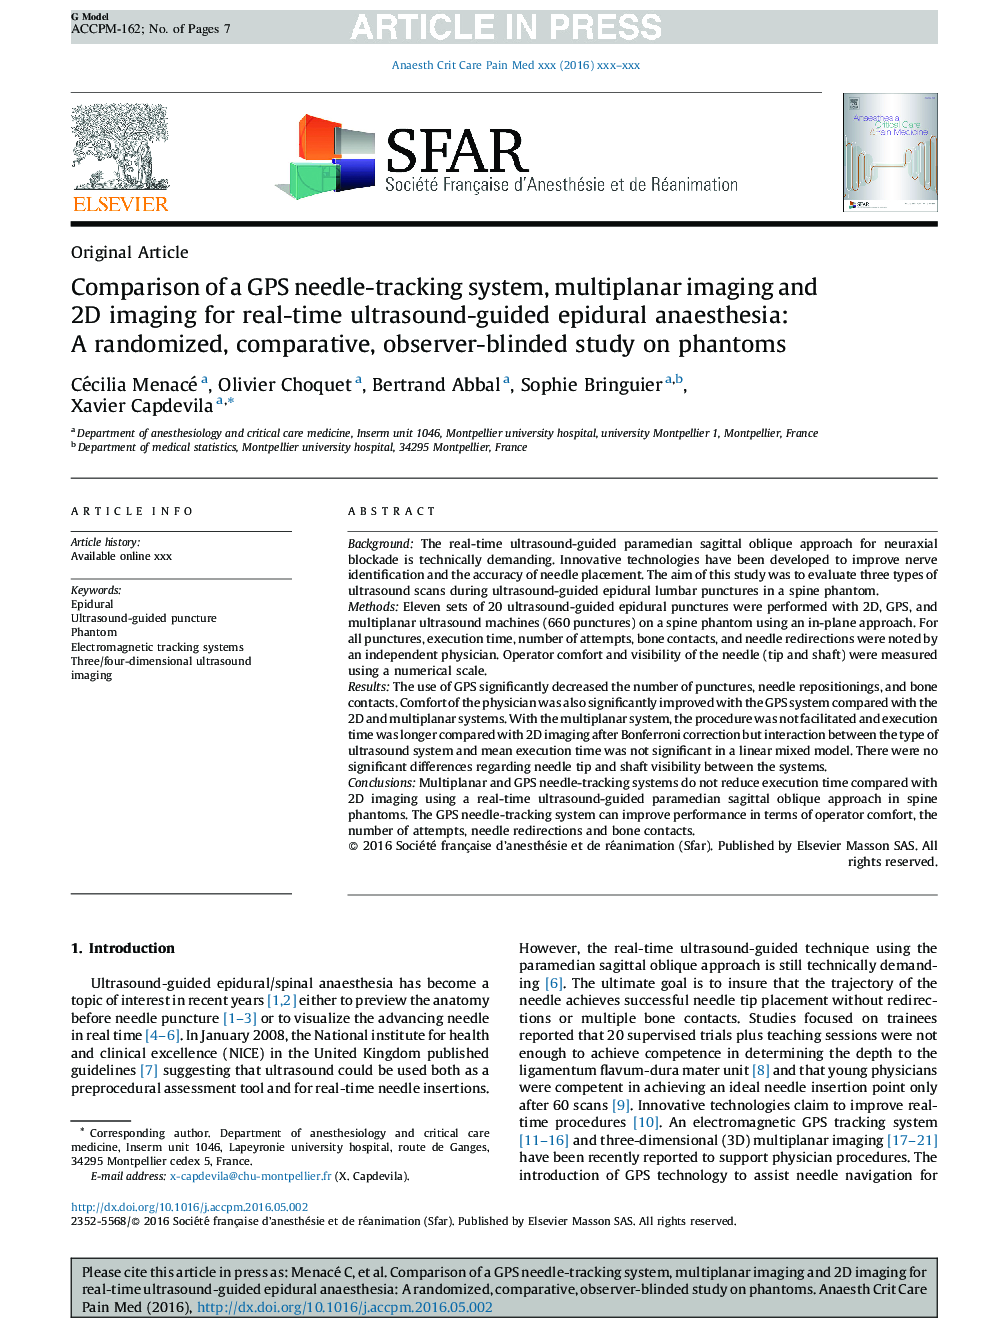 Comparison of a GPS needle-tracking system, multiplanar imaging and 2D imaging for real-time ultrasound-guided epidural anaesthesia: A randomized, comparative, observer-blinded study on phantoms